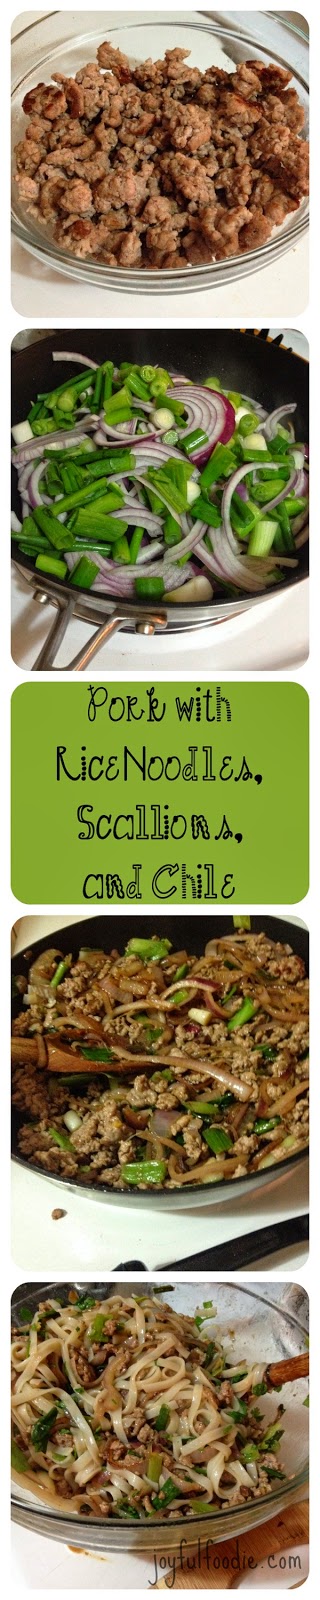 Joyfulfoodie.com Pork with rice noodles, scallions, and chile